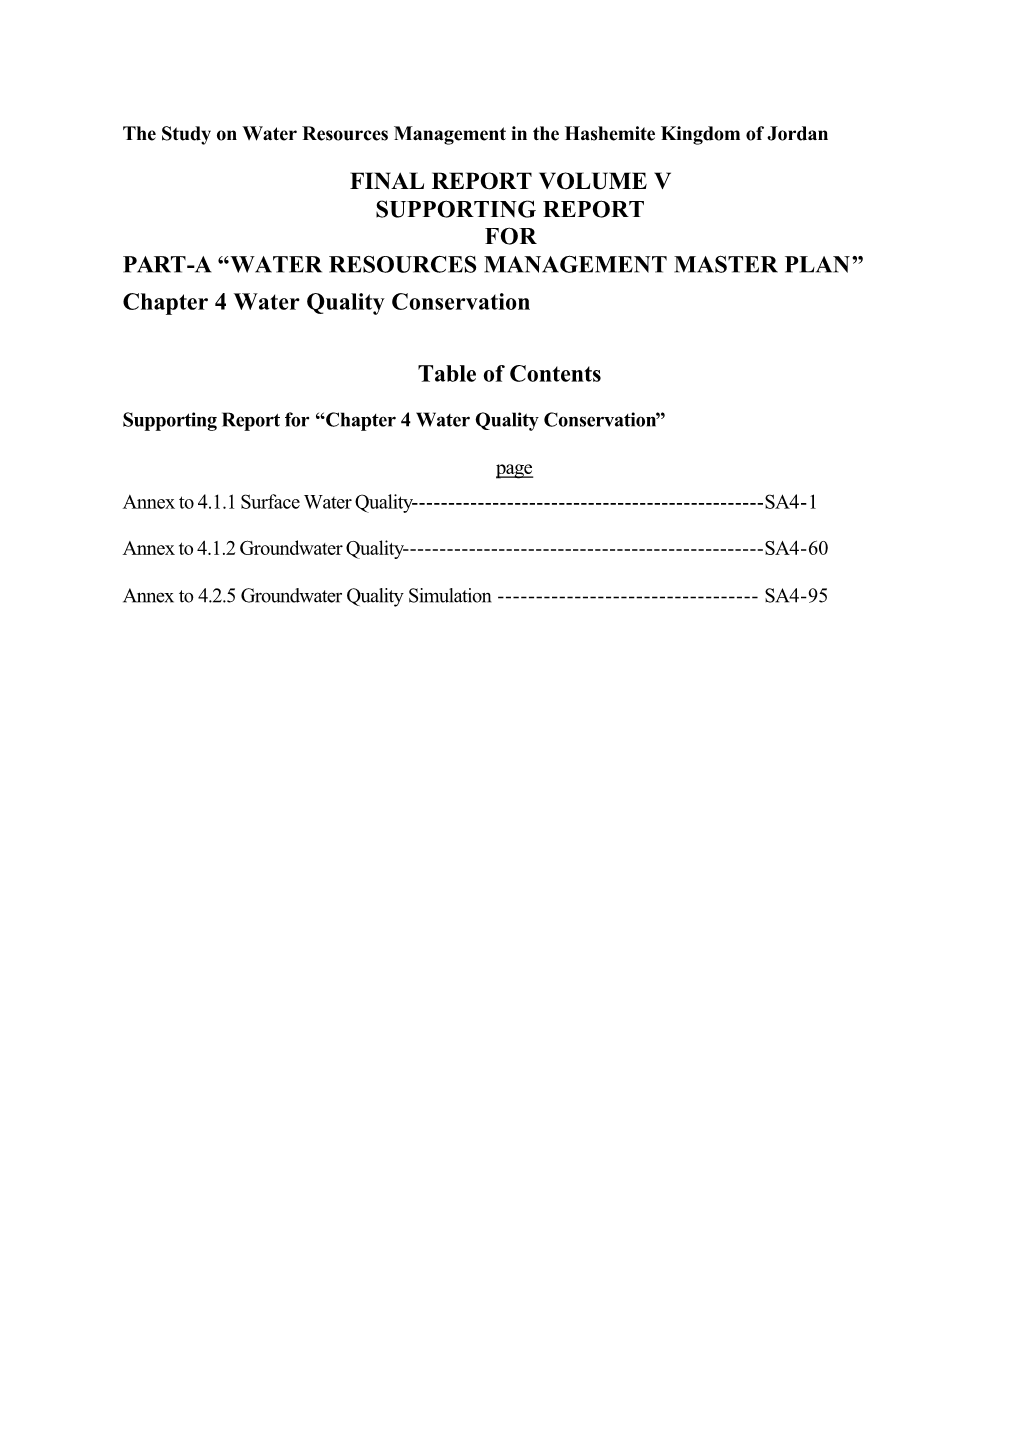 WATER RESOURCES MANAGEMENT MASTER PLAN” Chapter 4 Water Quality Conservation